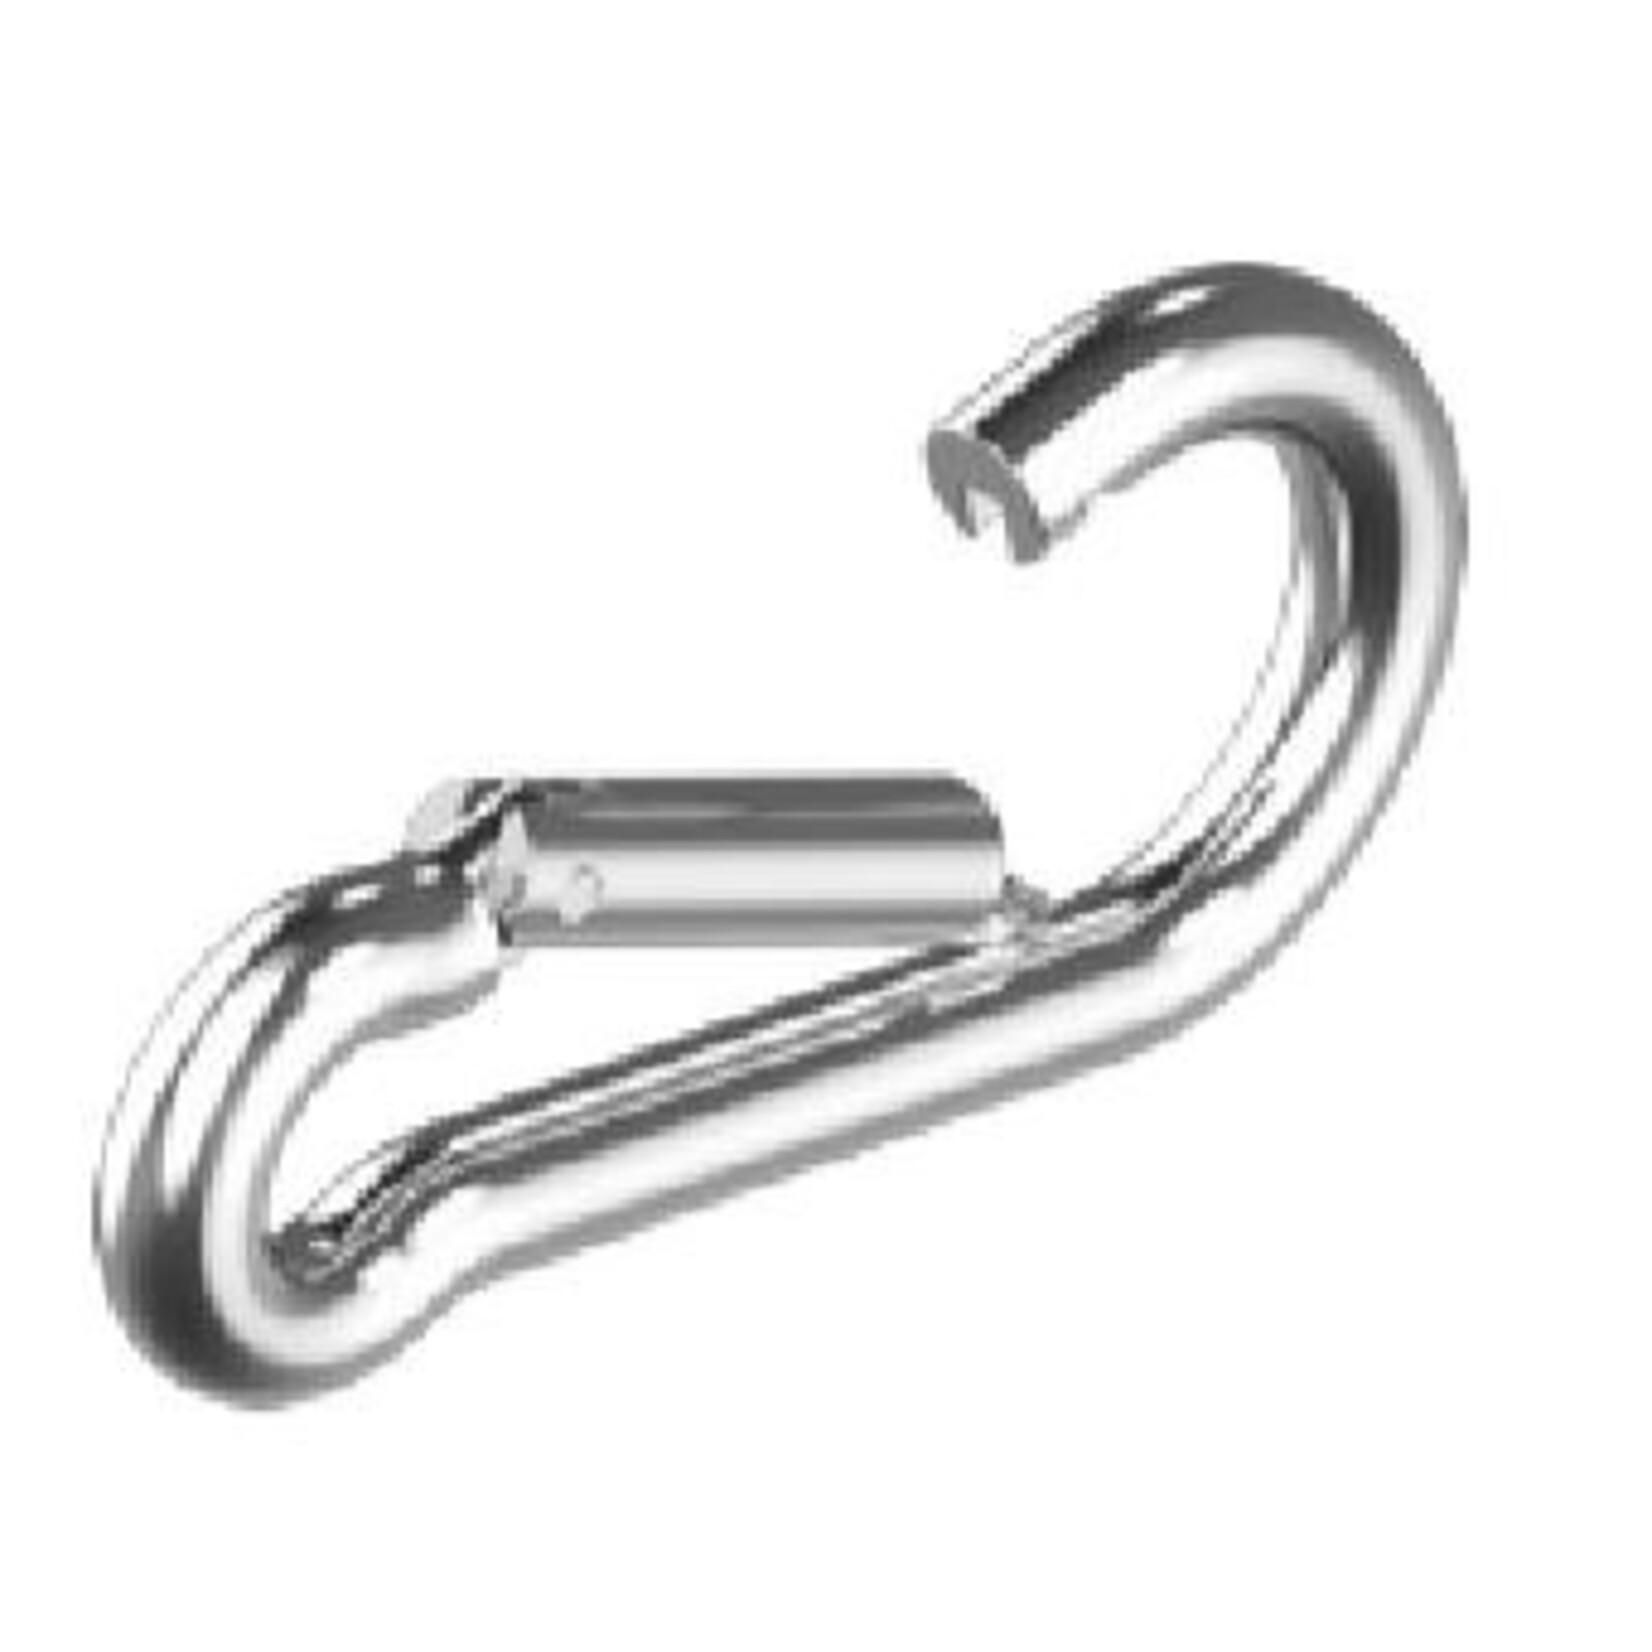 Snap hook stainless 6x60mm 10 pcs